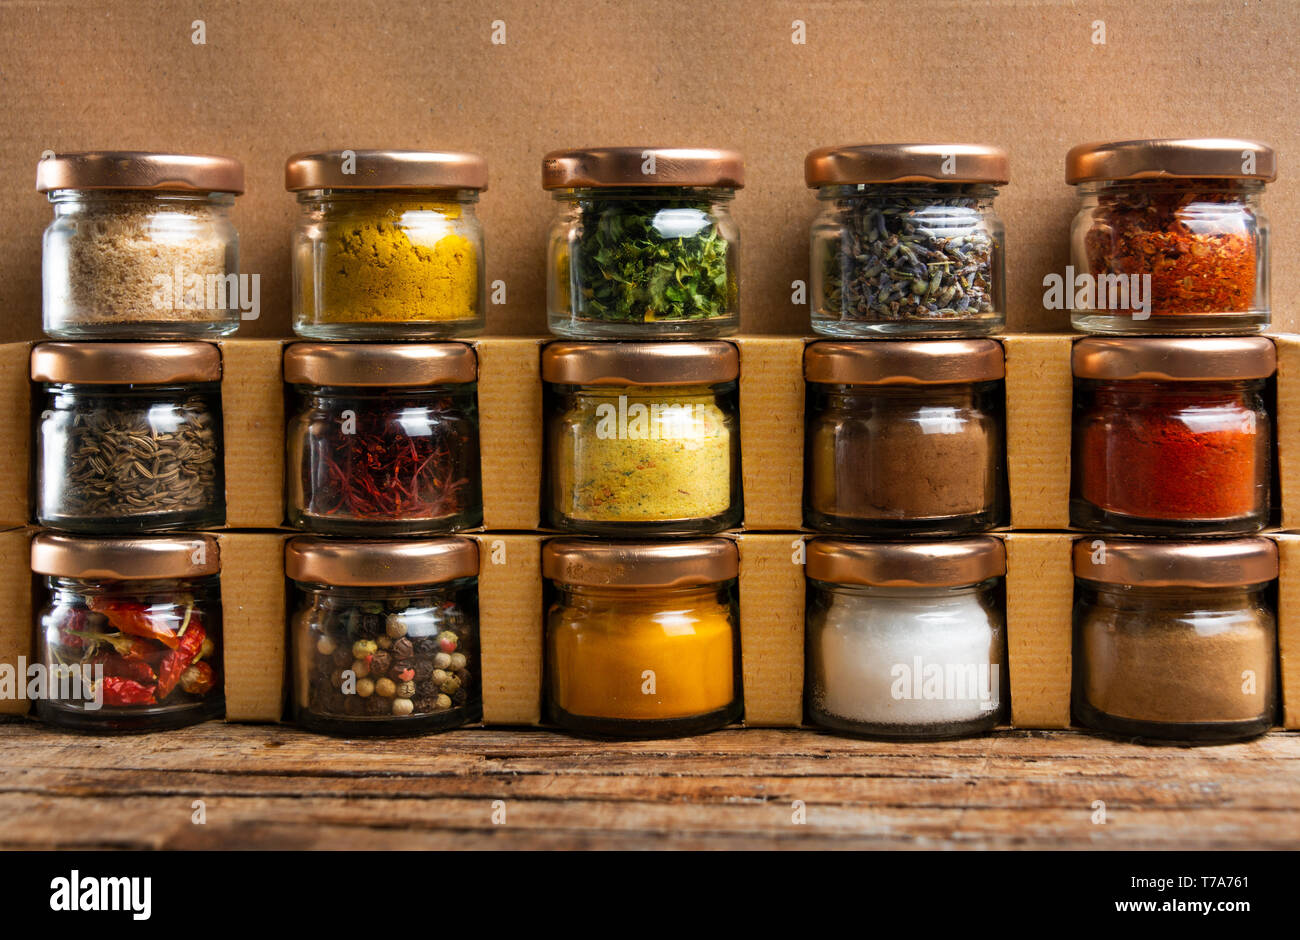 Download Large Collection Of Spices In Small Jars On The Shelf Stock Photo Alamy Yellowimages Mockups